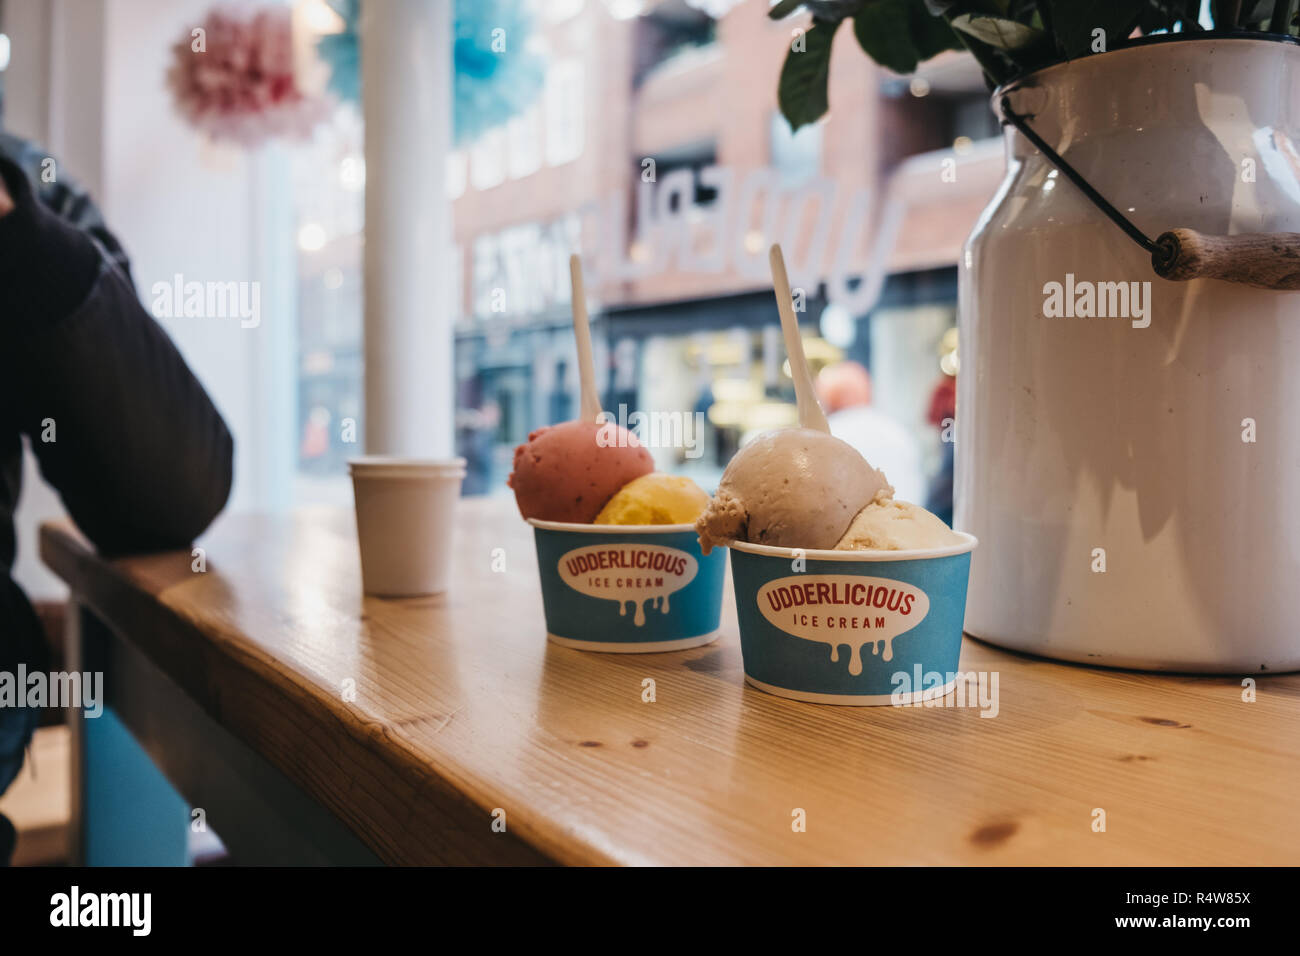 London, UK - November 21, 2018: Tubs of ice-cream on a table inside Udderlicious, an independent ice-cream parlour in Covent Garden, London, UK. Stock Photo